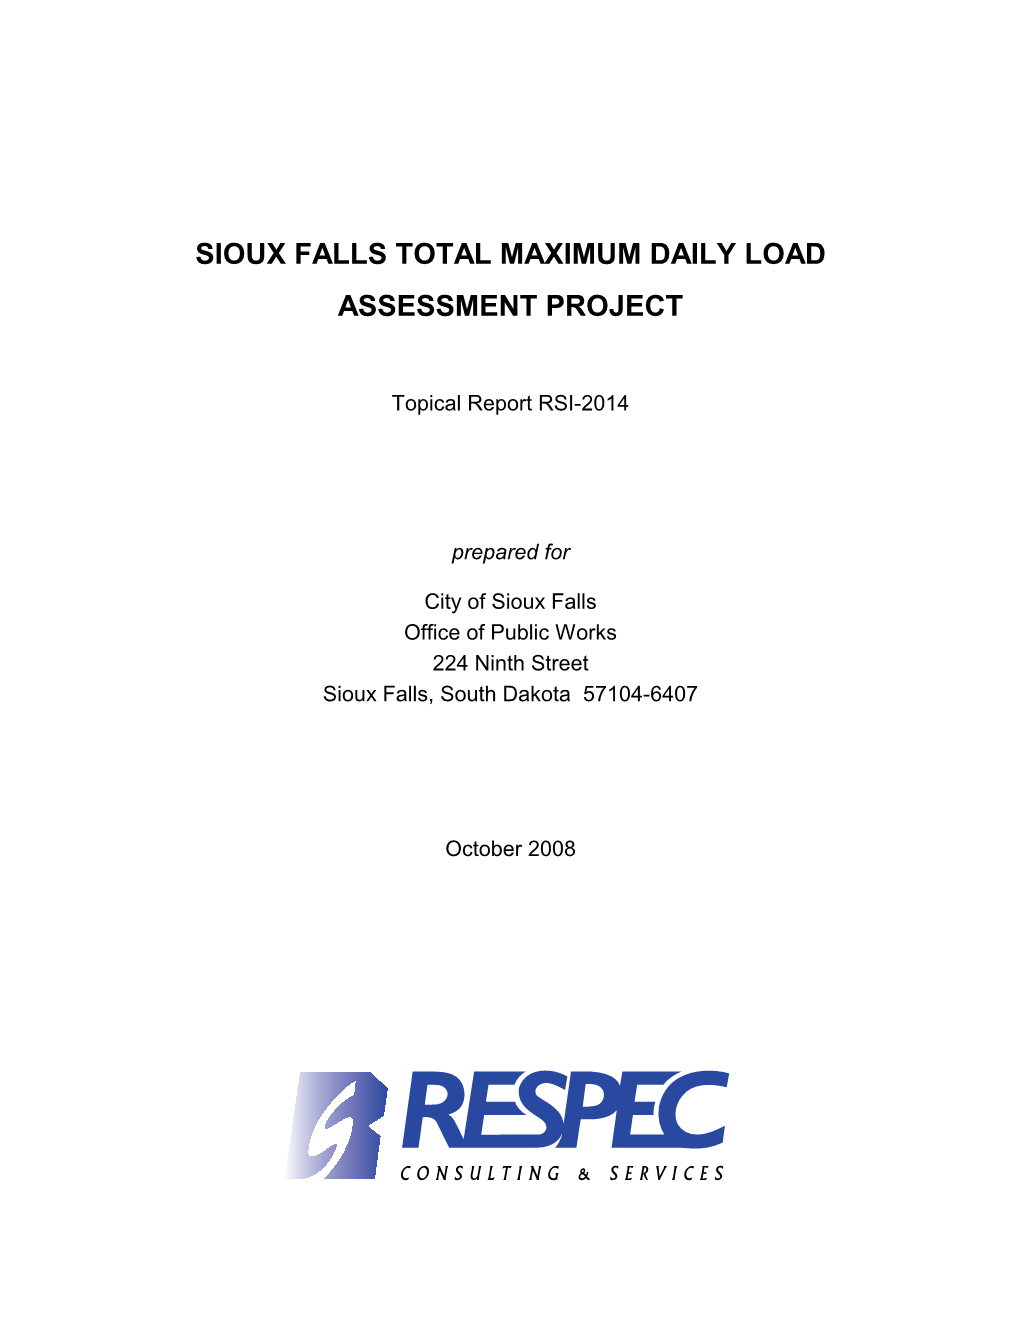 Assessment Project Report